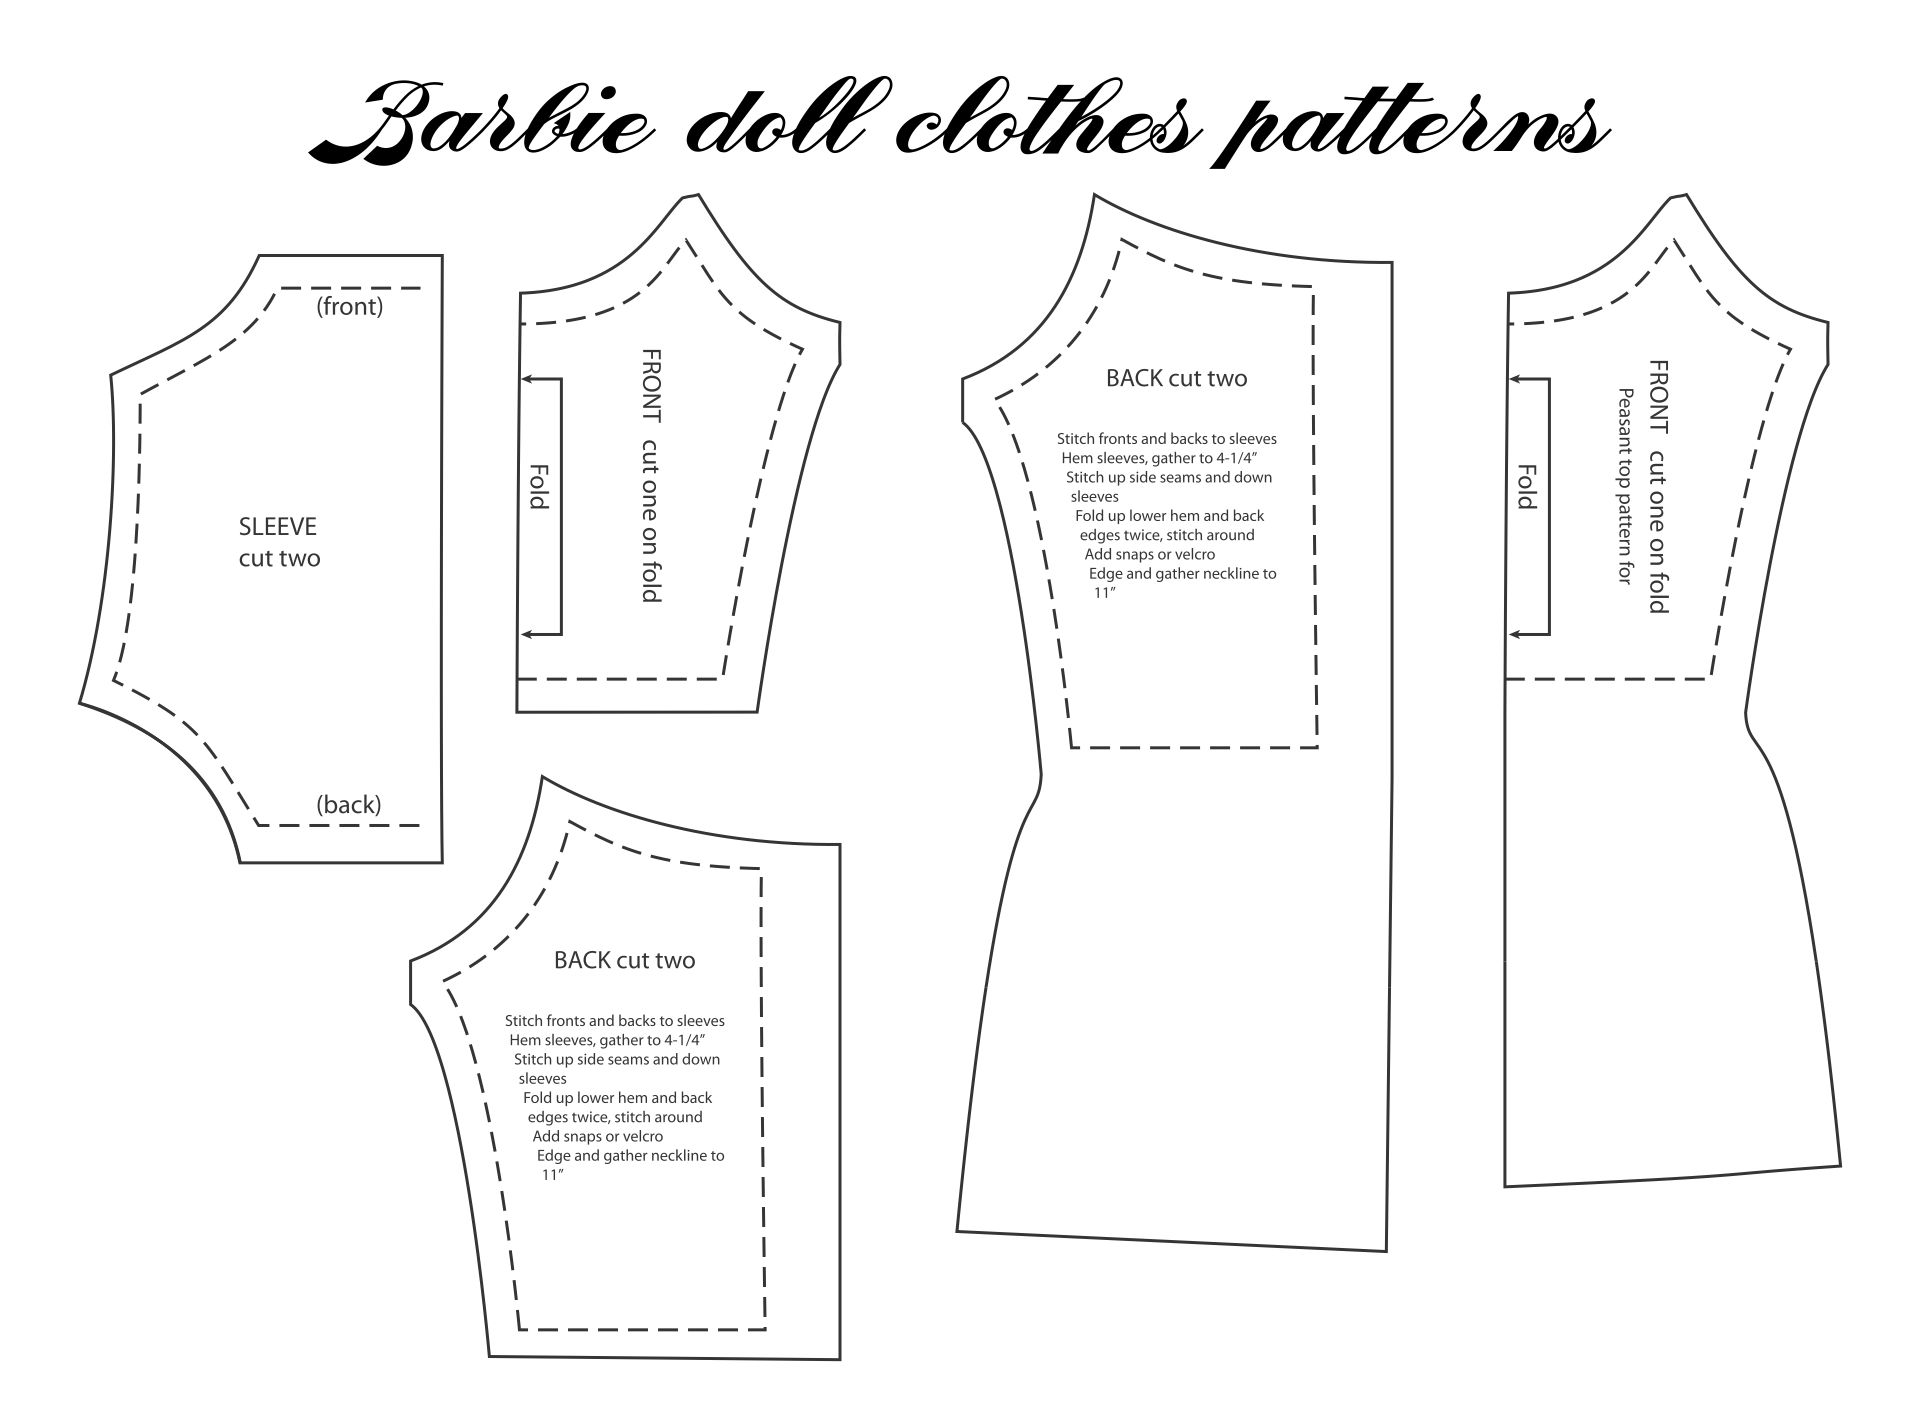 How To Draft Patterns For DIY Barbie Clothes The Shapes Of Fabric